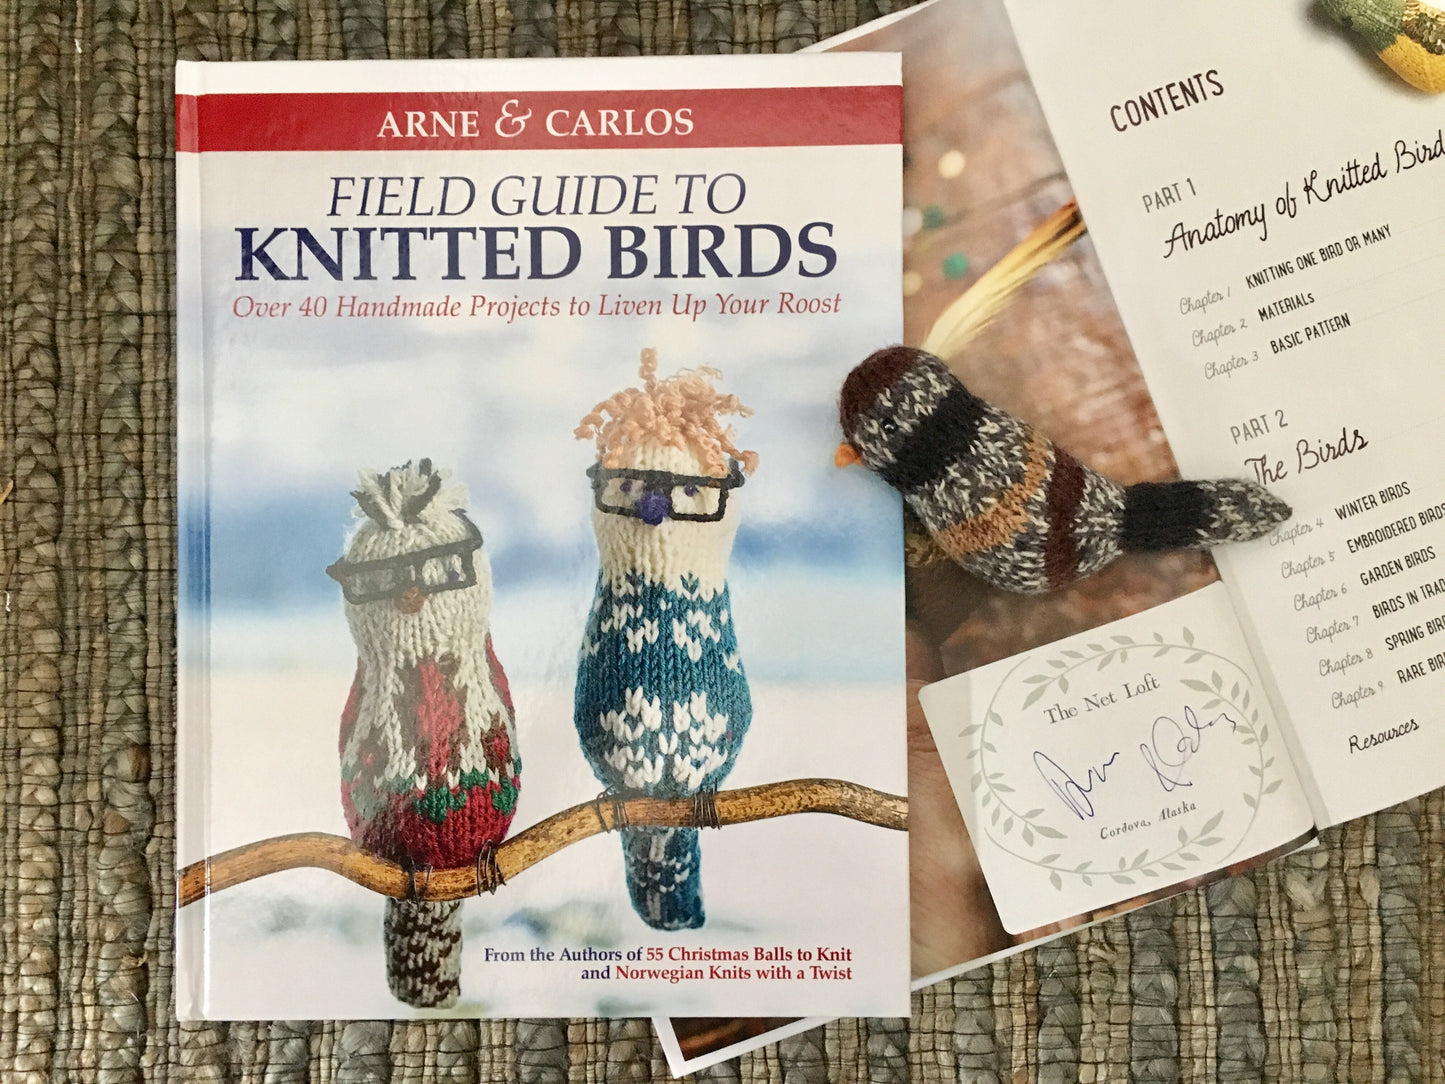 Field Guide to Knitted Birds by Arne & Carlos